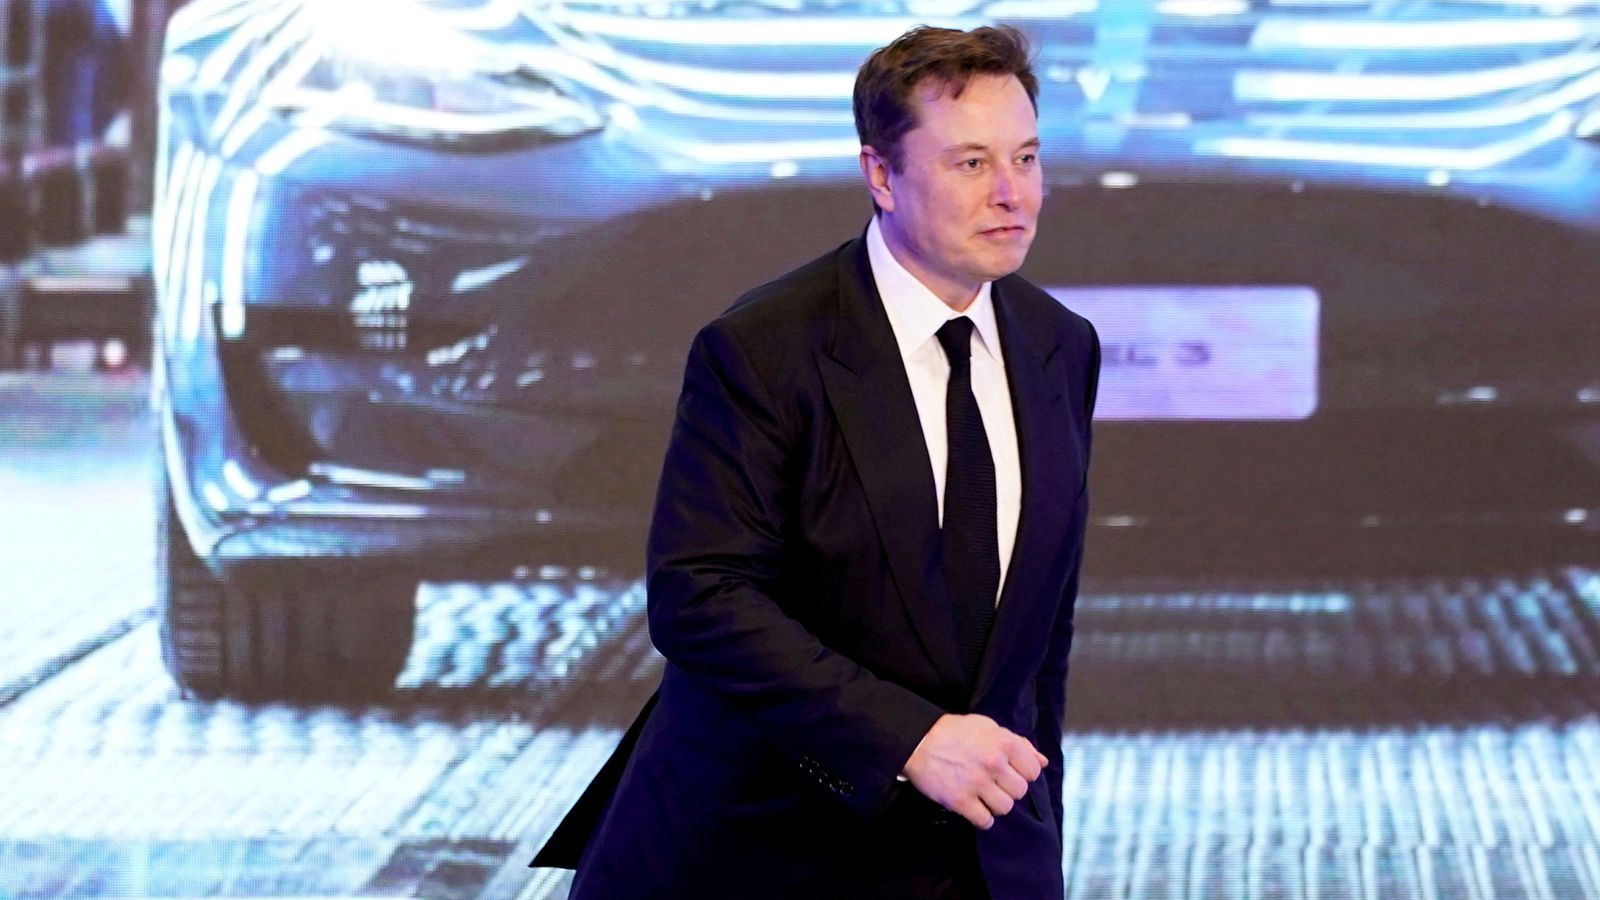 Elon Musk: Tesla shares down again following car delivery disappointment